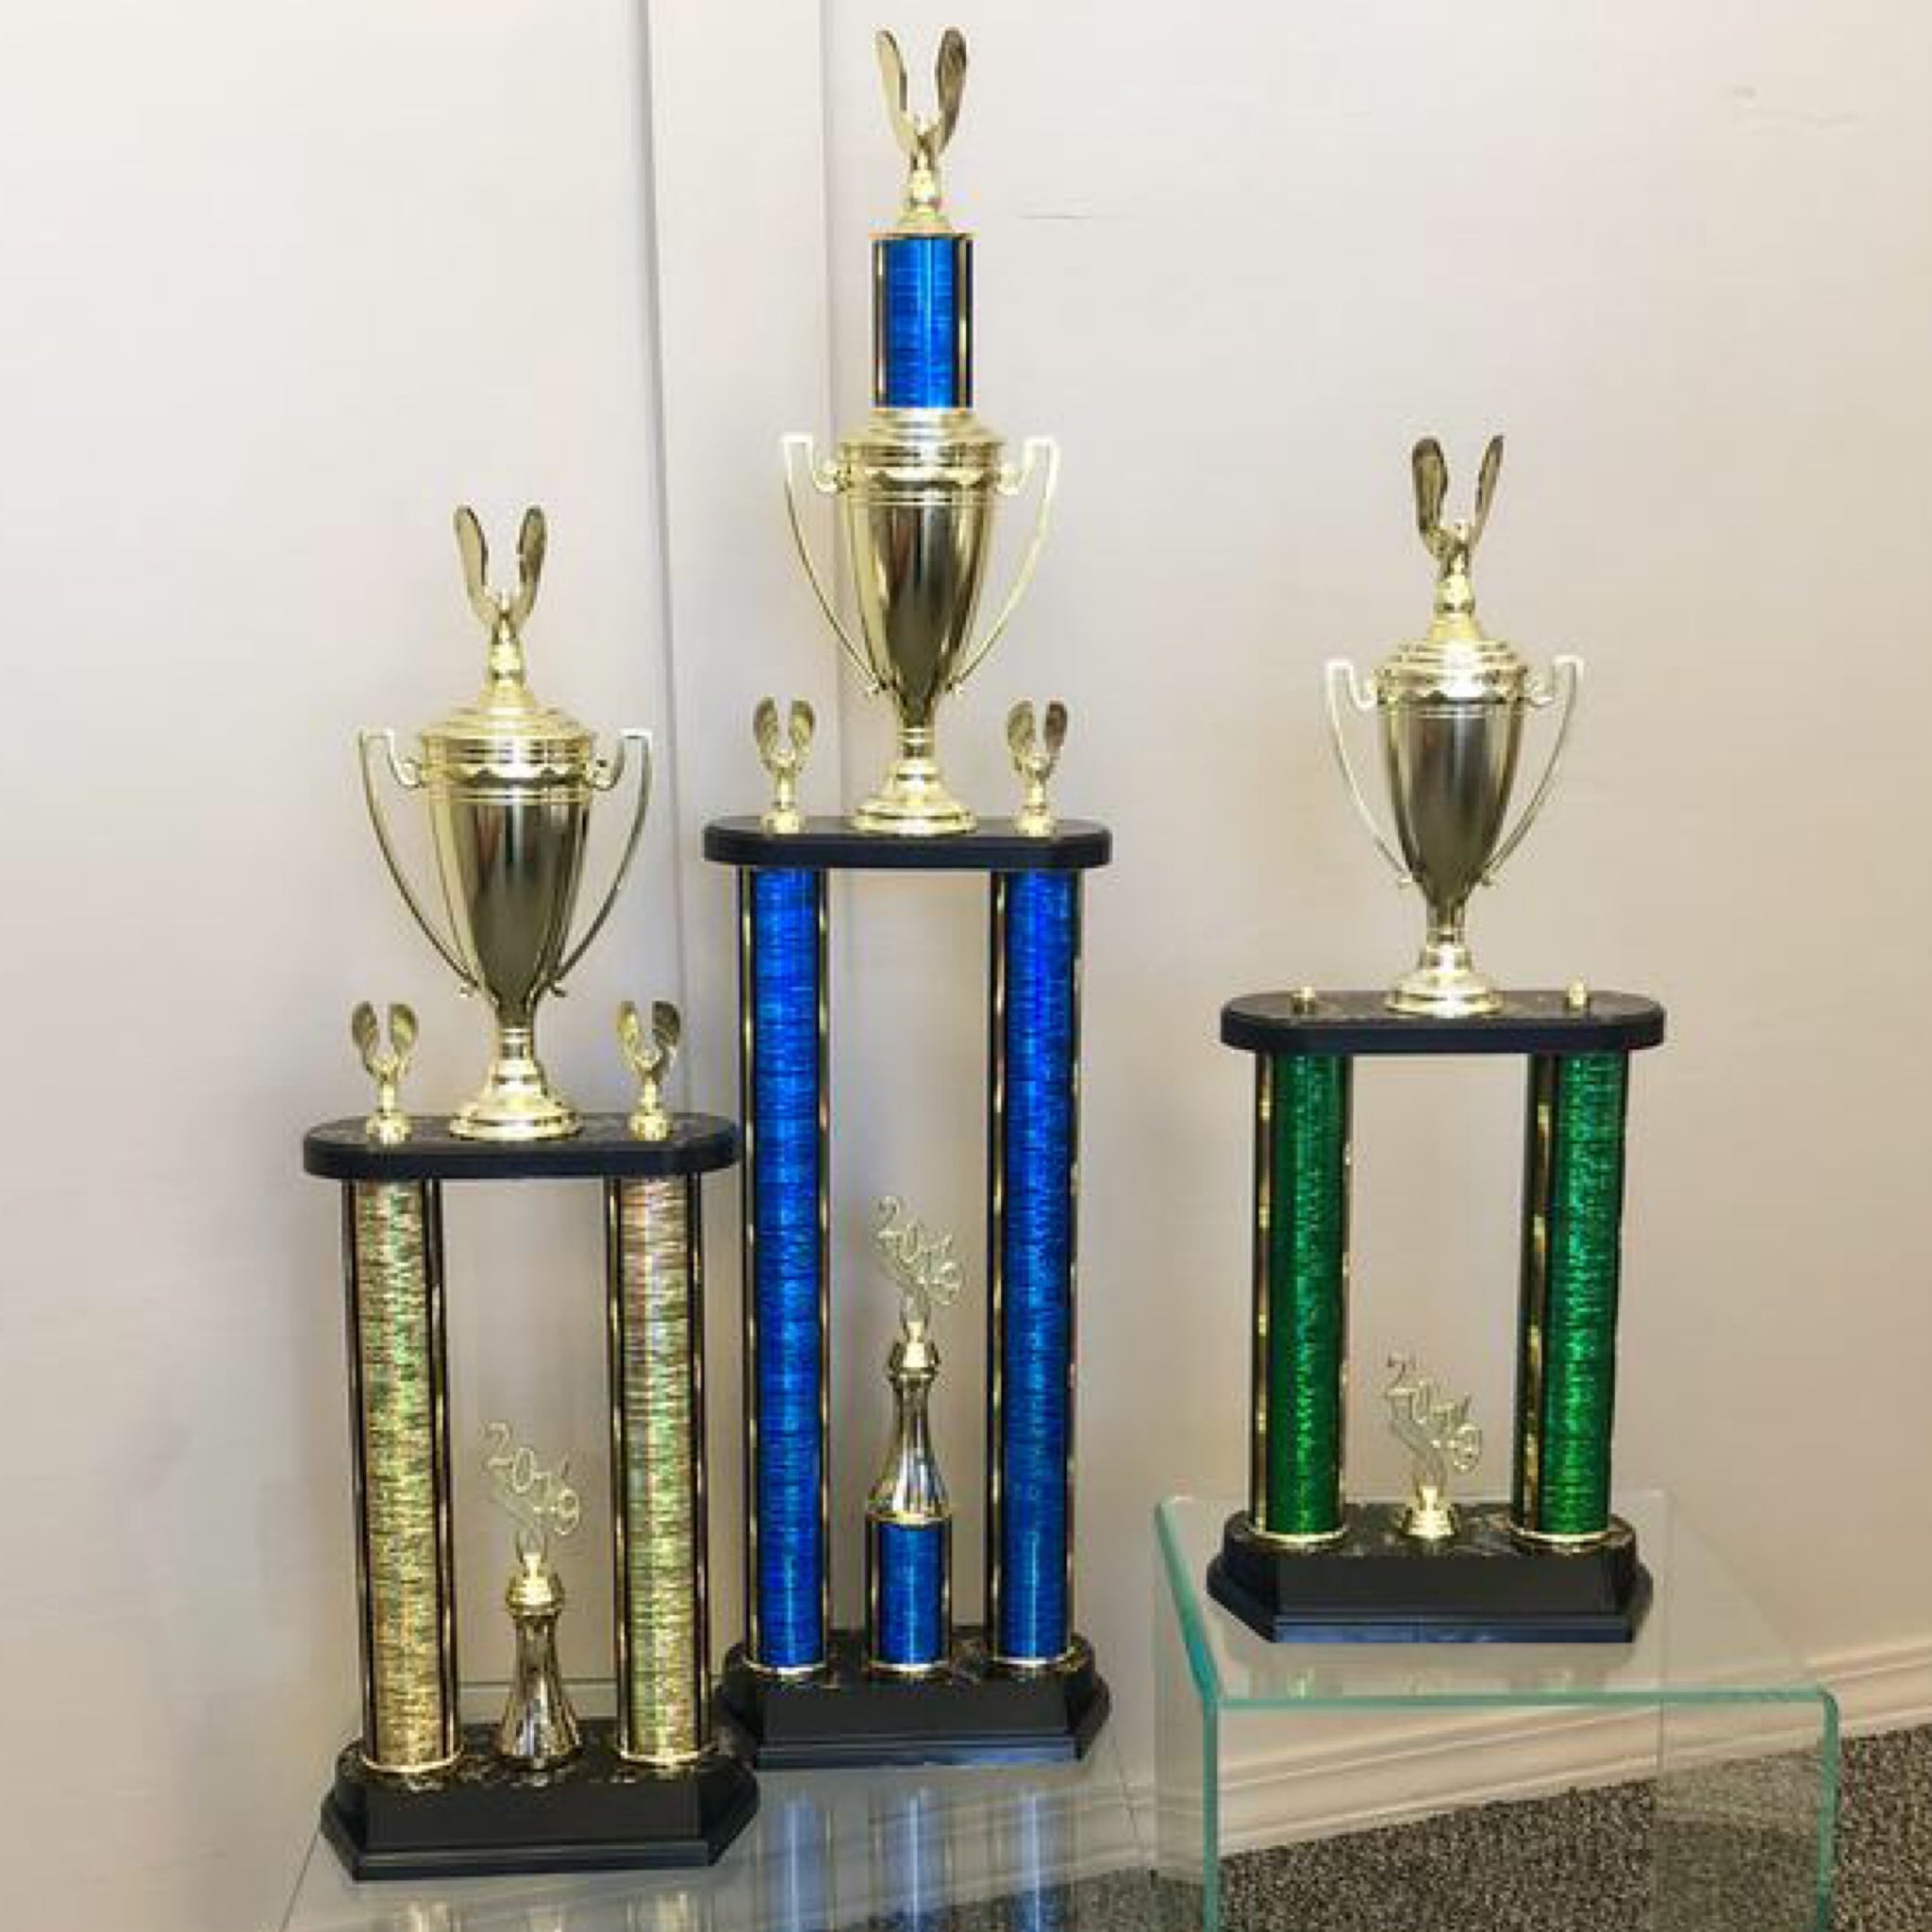 Medium size two post column trophies. Gold two post trophy with cup. Blue two post column trophy with cup. Green two post column trophy with cup.